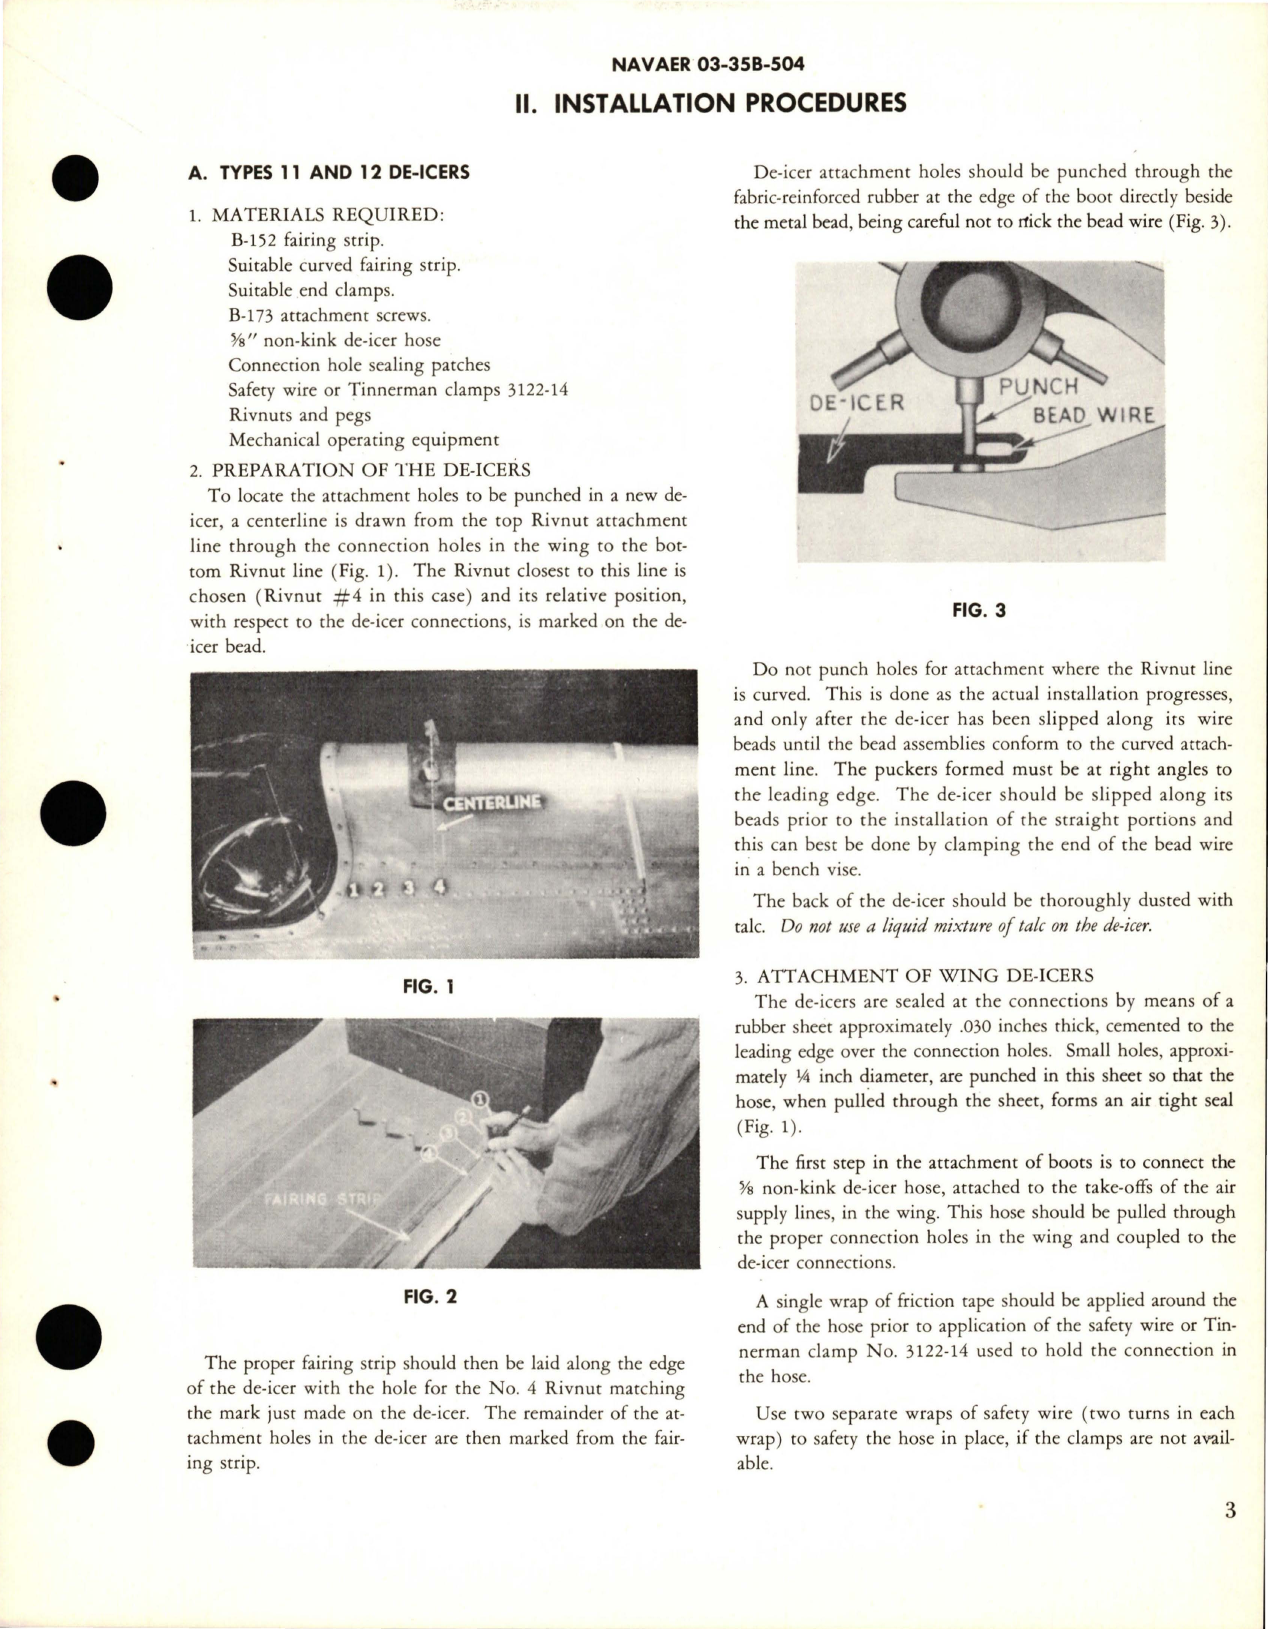 Sample page 9 from AirCorps Library document: Instruction Manual for De-Icer Care & Maintenance, Installation, Inspection, and Repairs